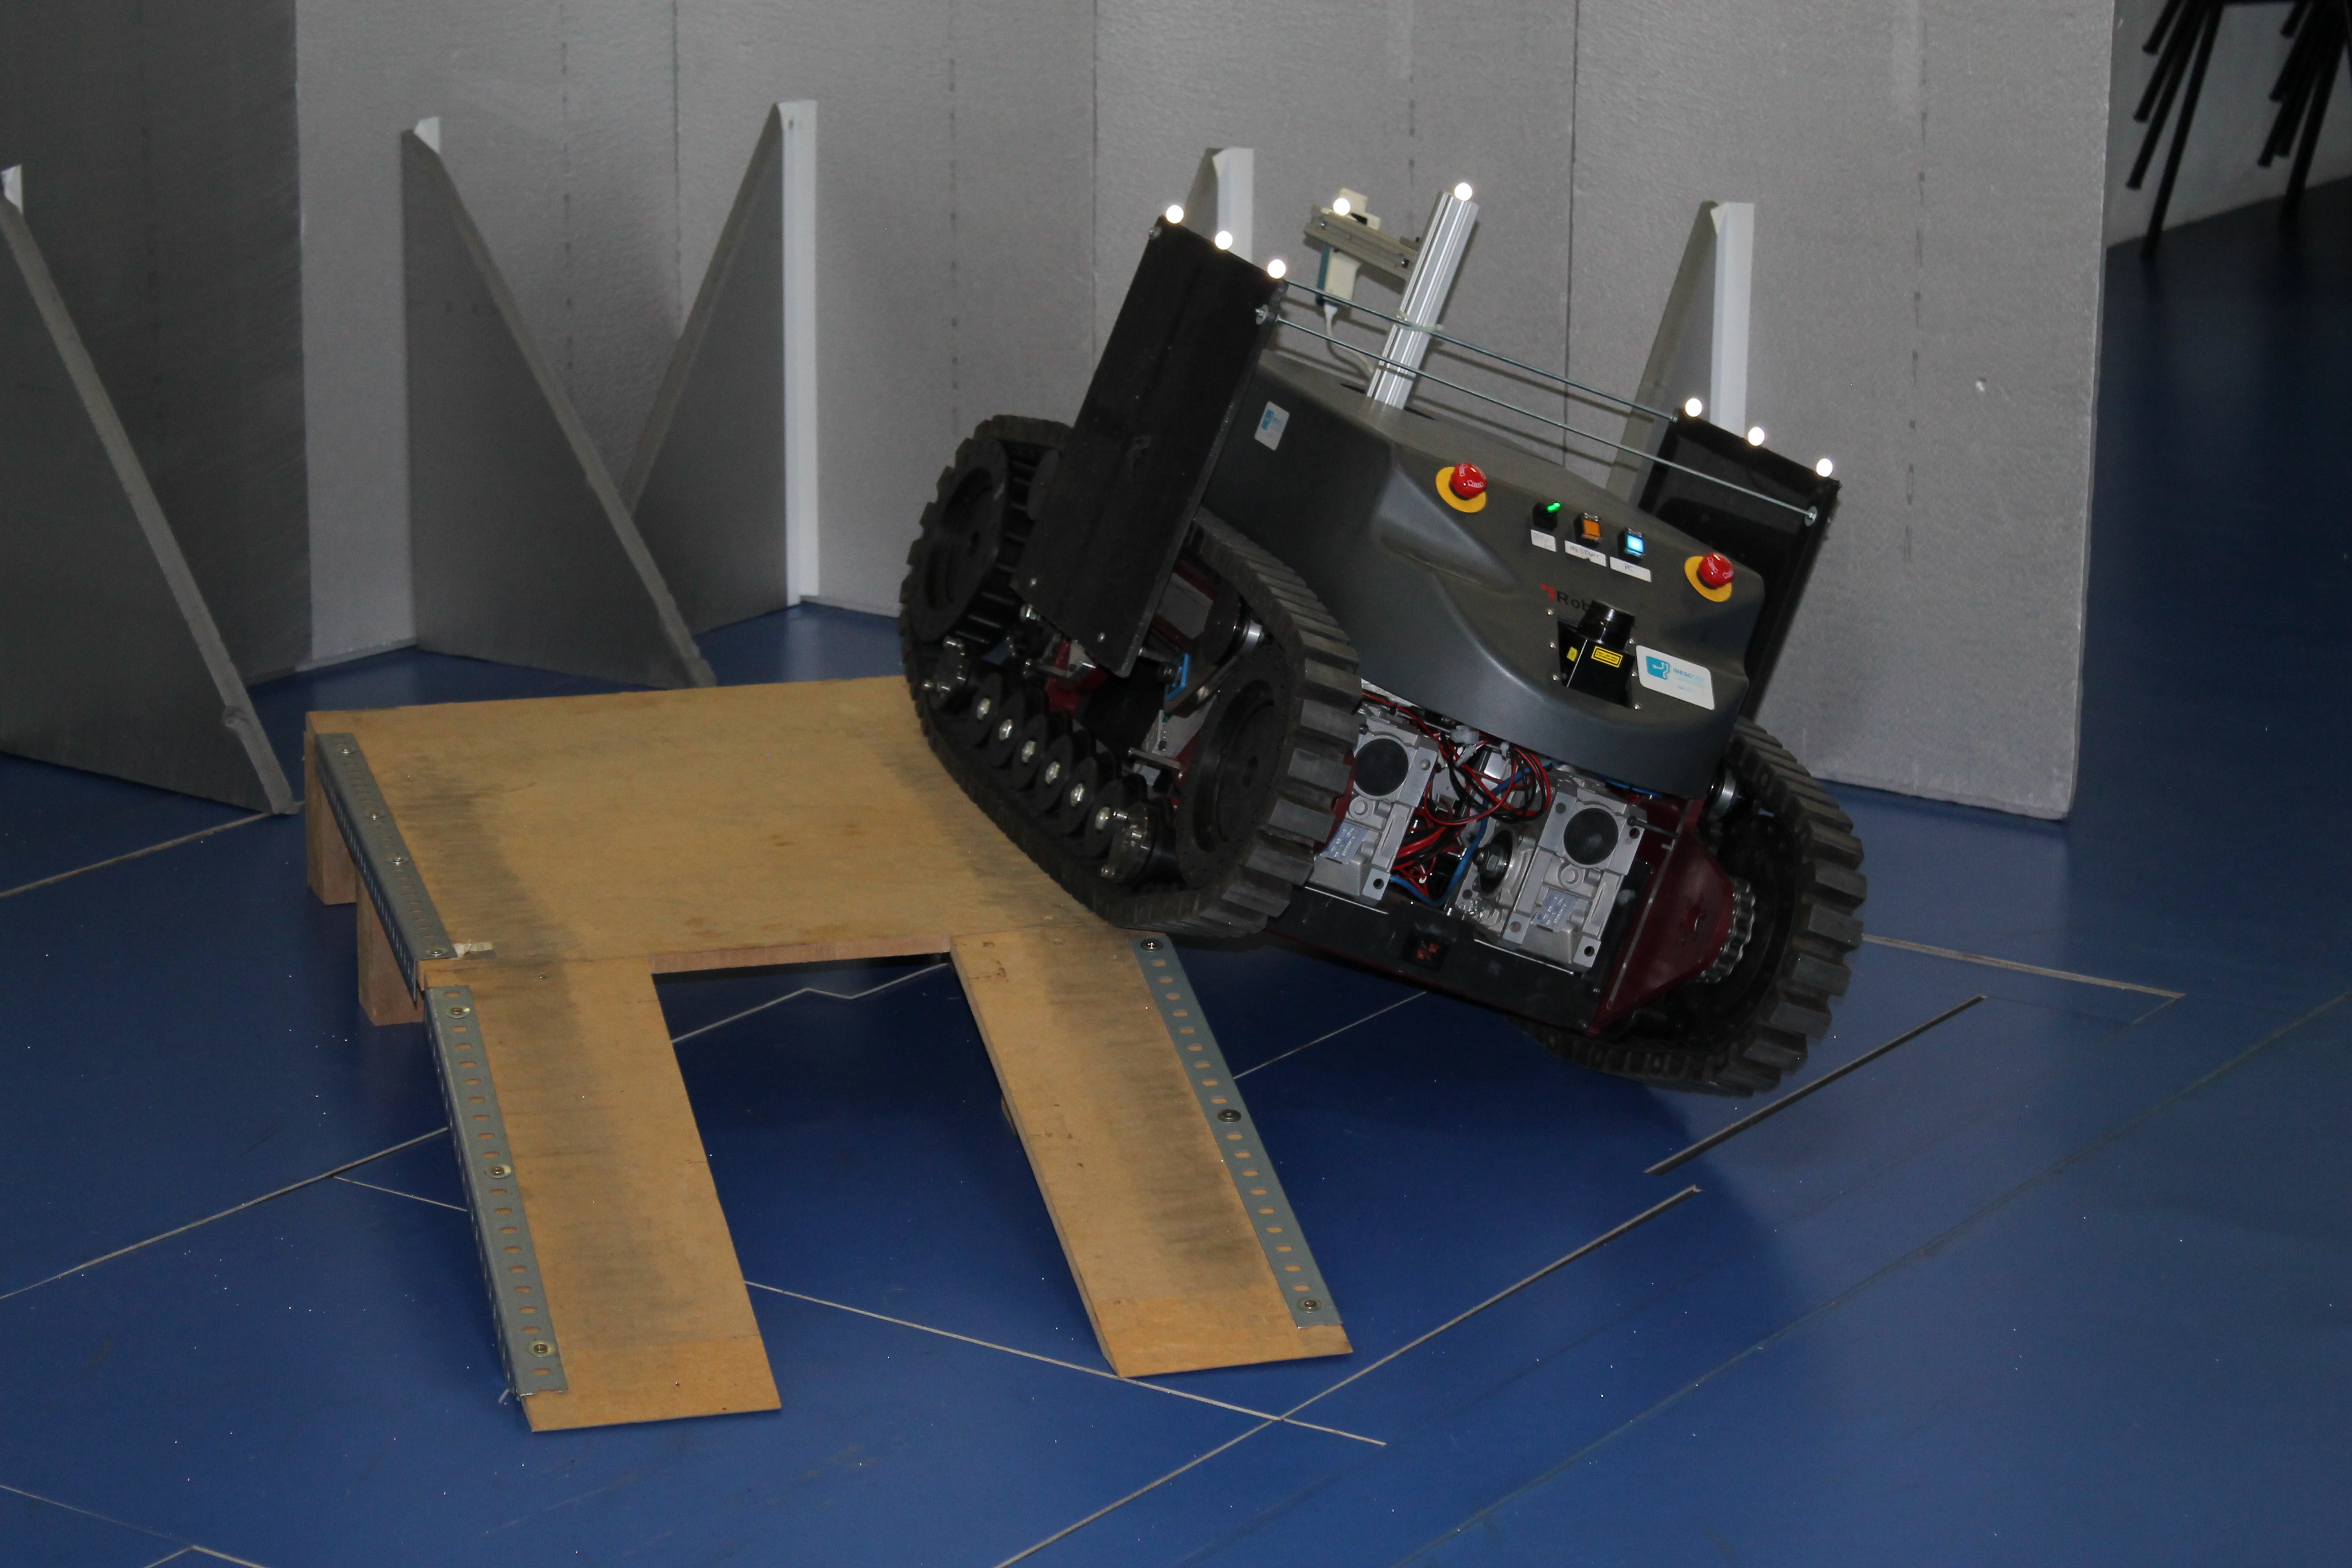 Third testing environment with robot climbing the ramp